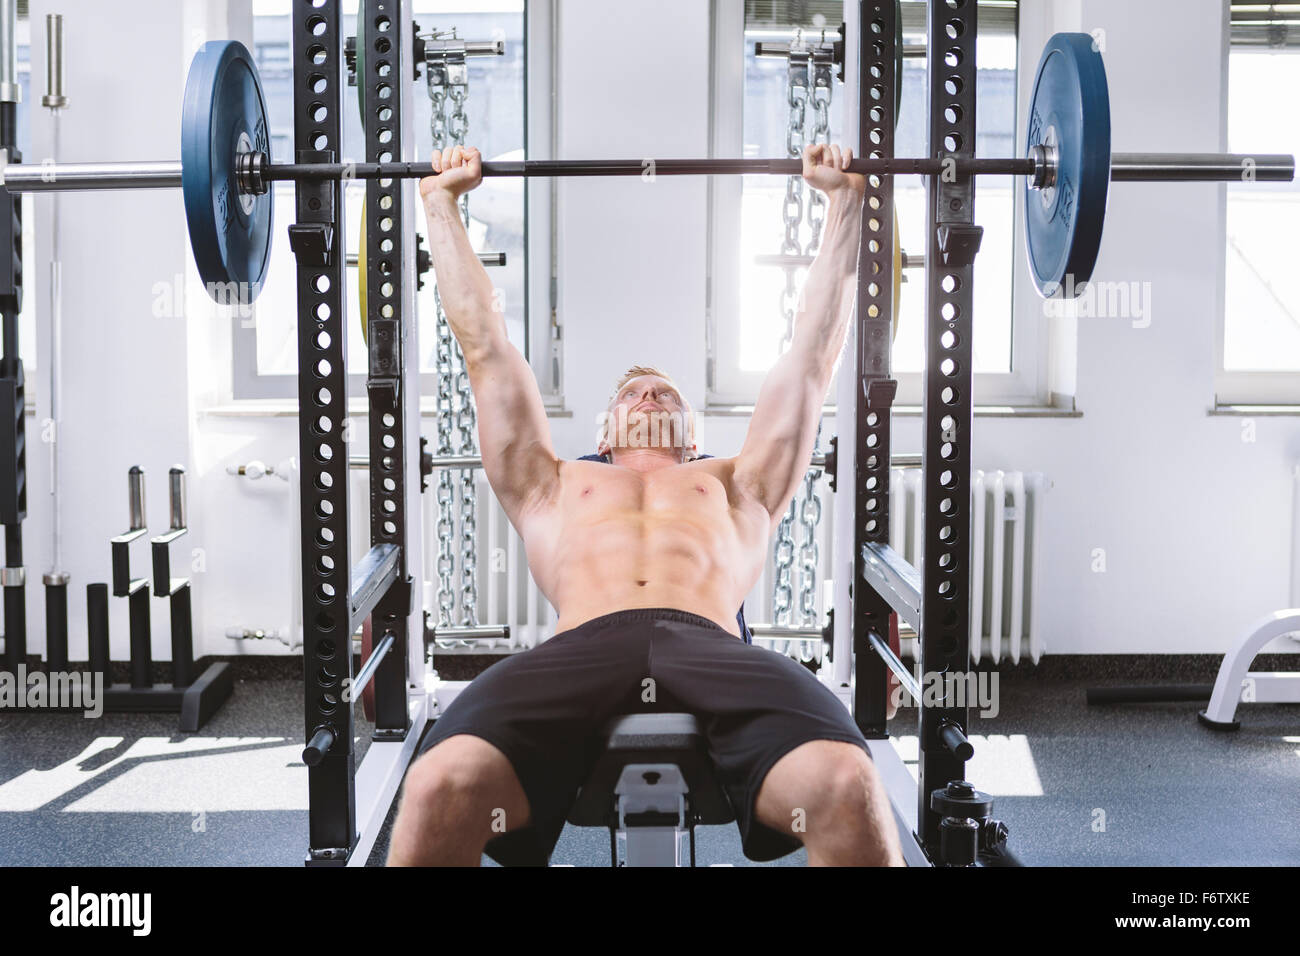 Physical athlete doing bench presses Stock Photo